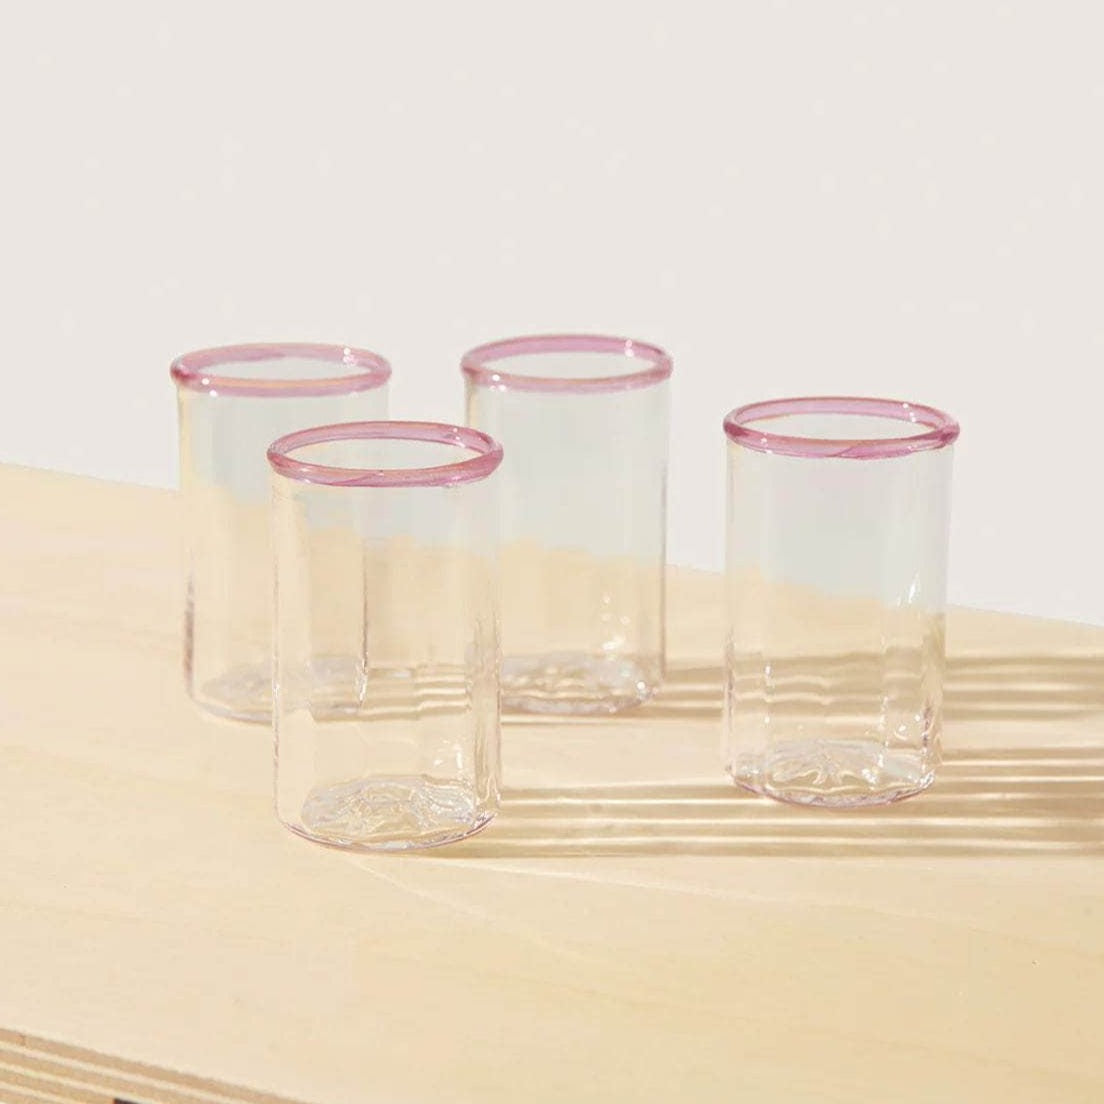 Peter Glass Pink Small - Set of Four